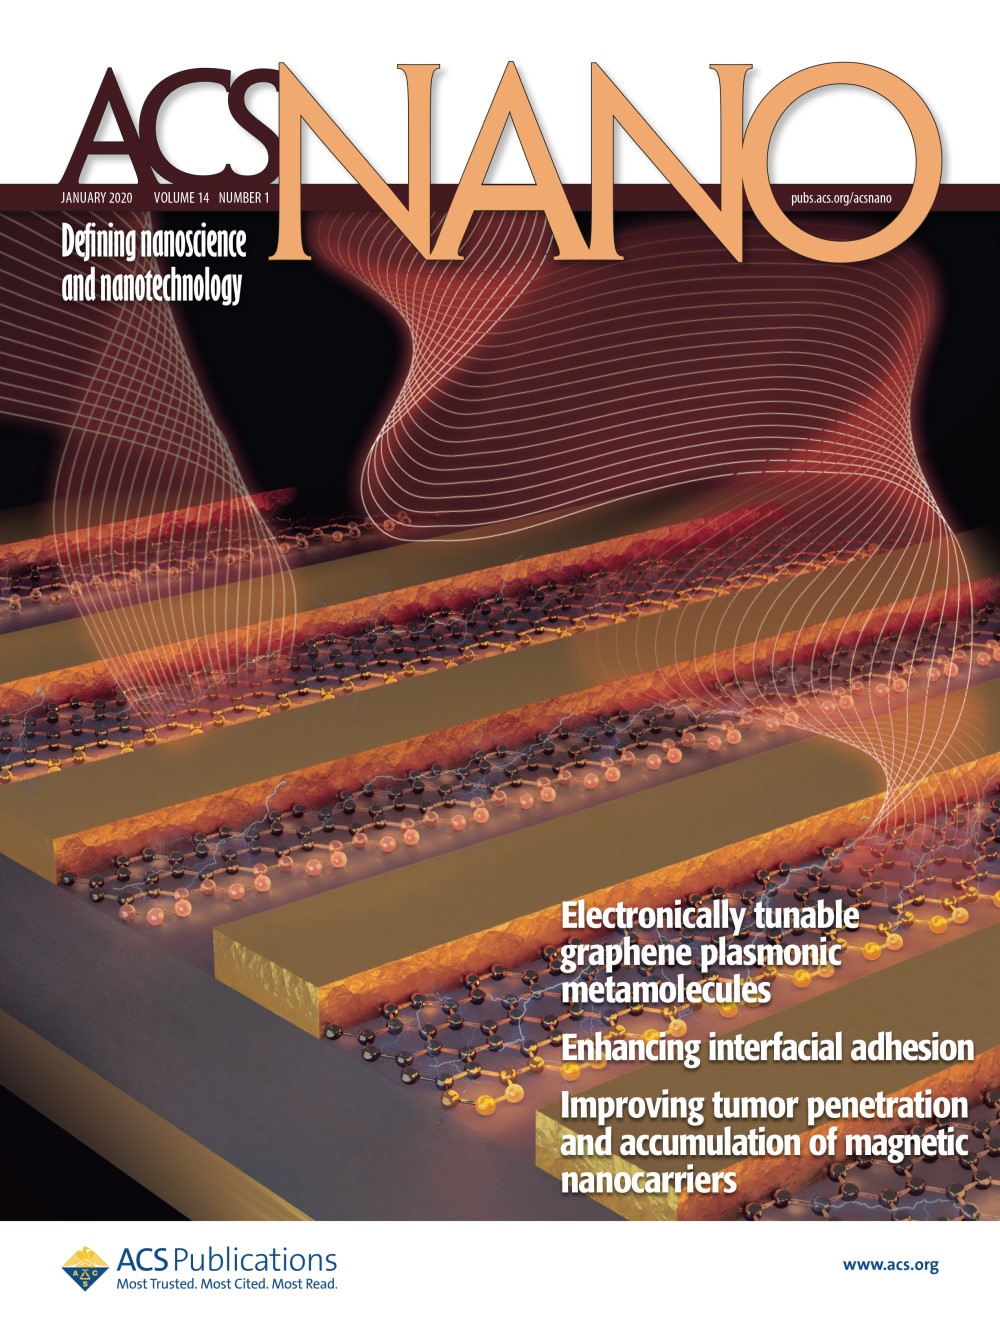 The front cover of ACS Nano published on January 28.